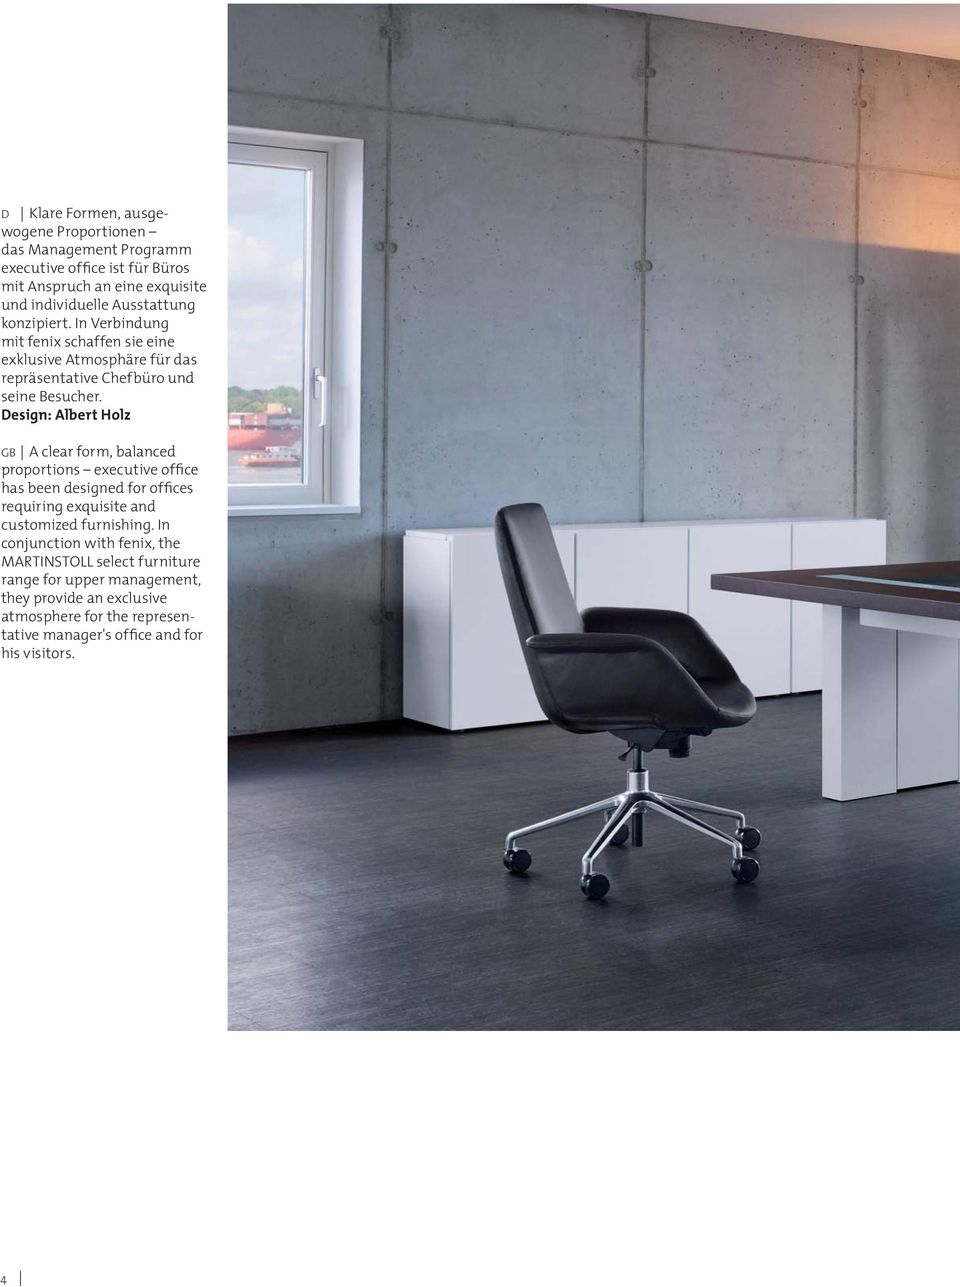 Design: Albert Holz GB A clear form, balanced proportions executive office has been designed for offices requiring exquisite and customized furnishing.